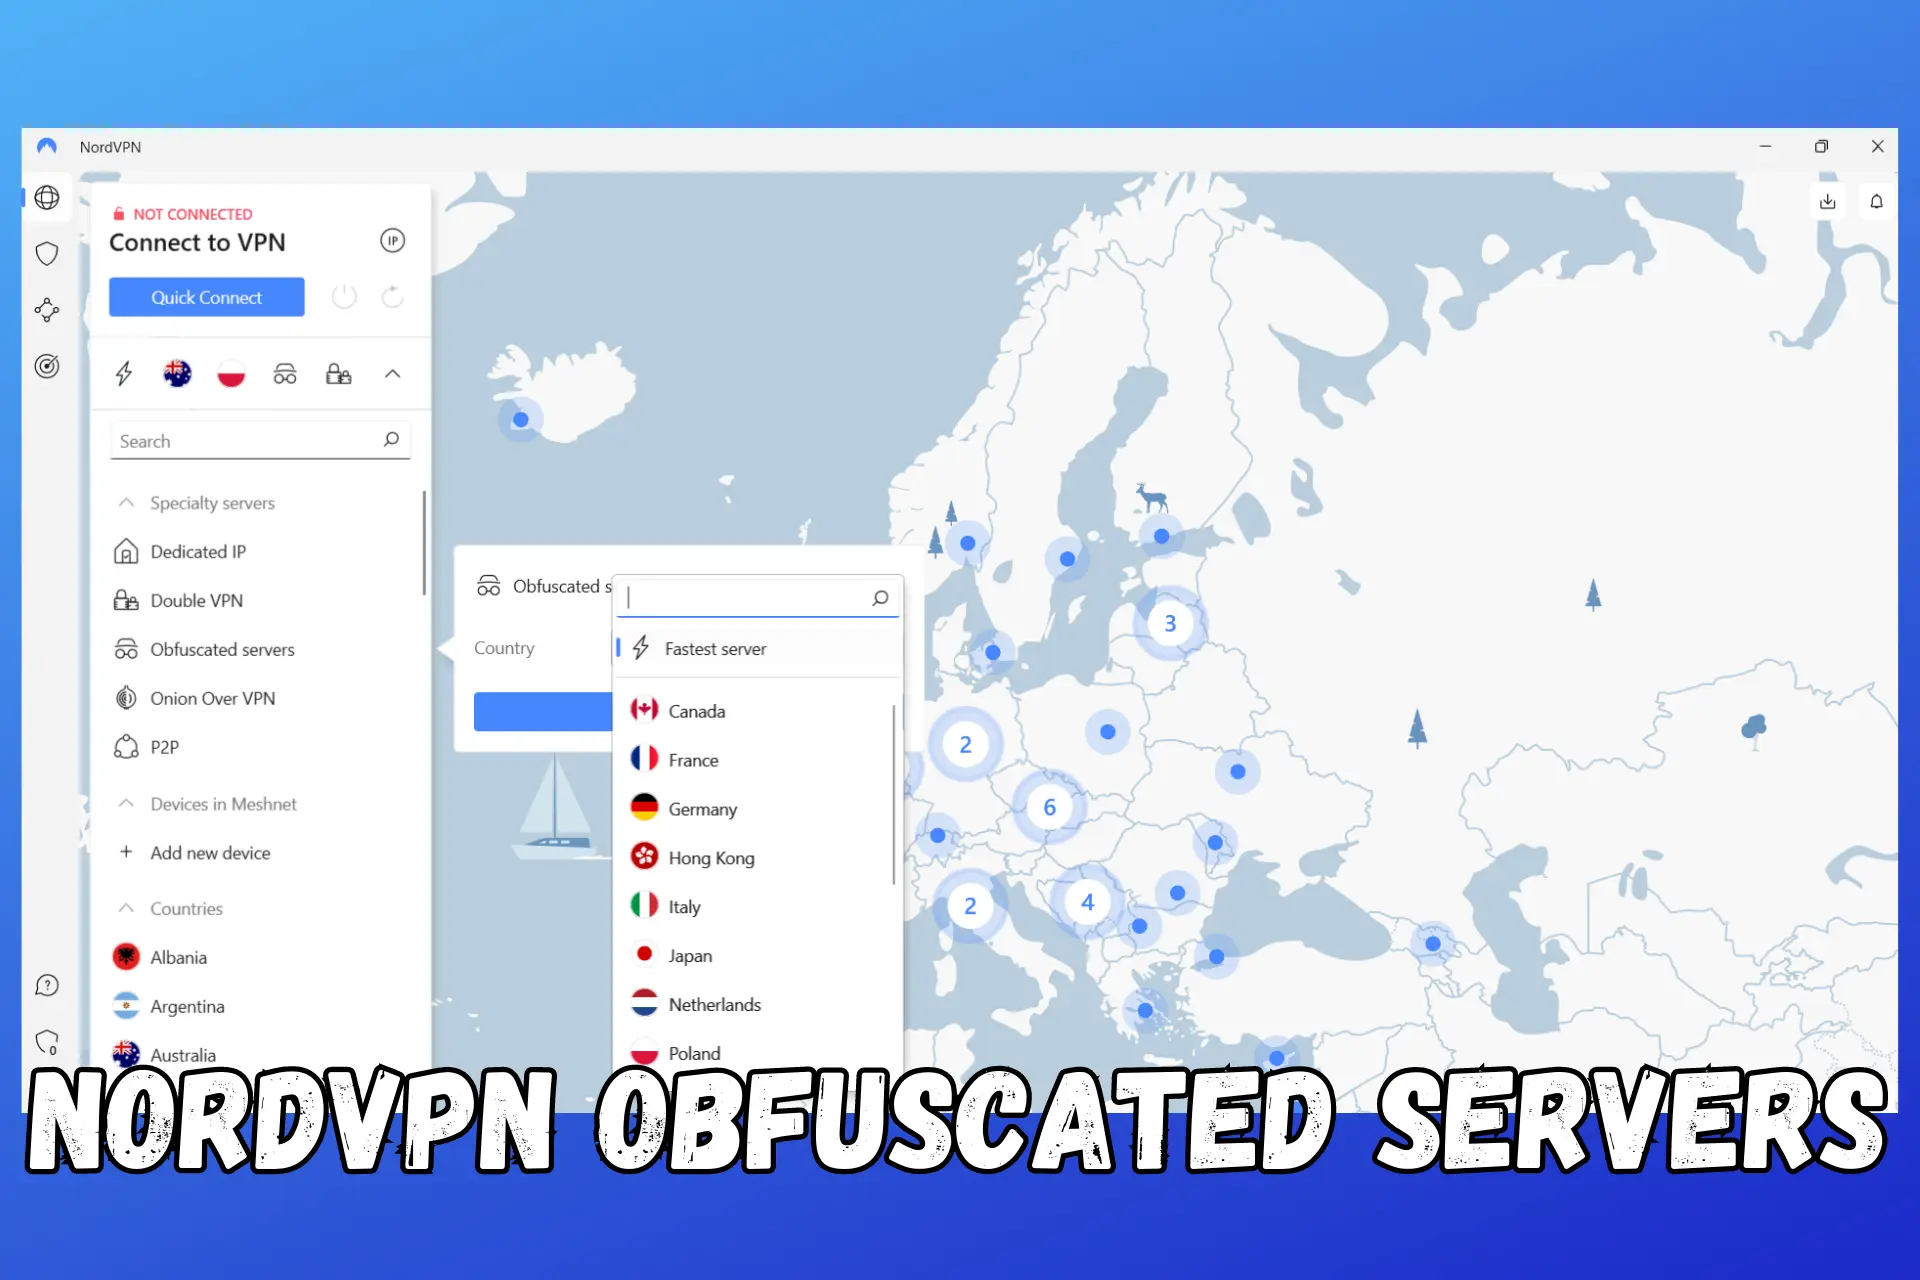 nordvpn obfuscated server list